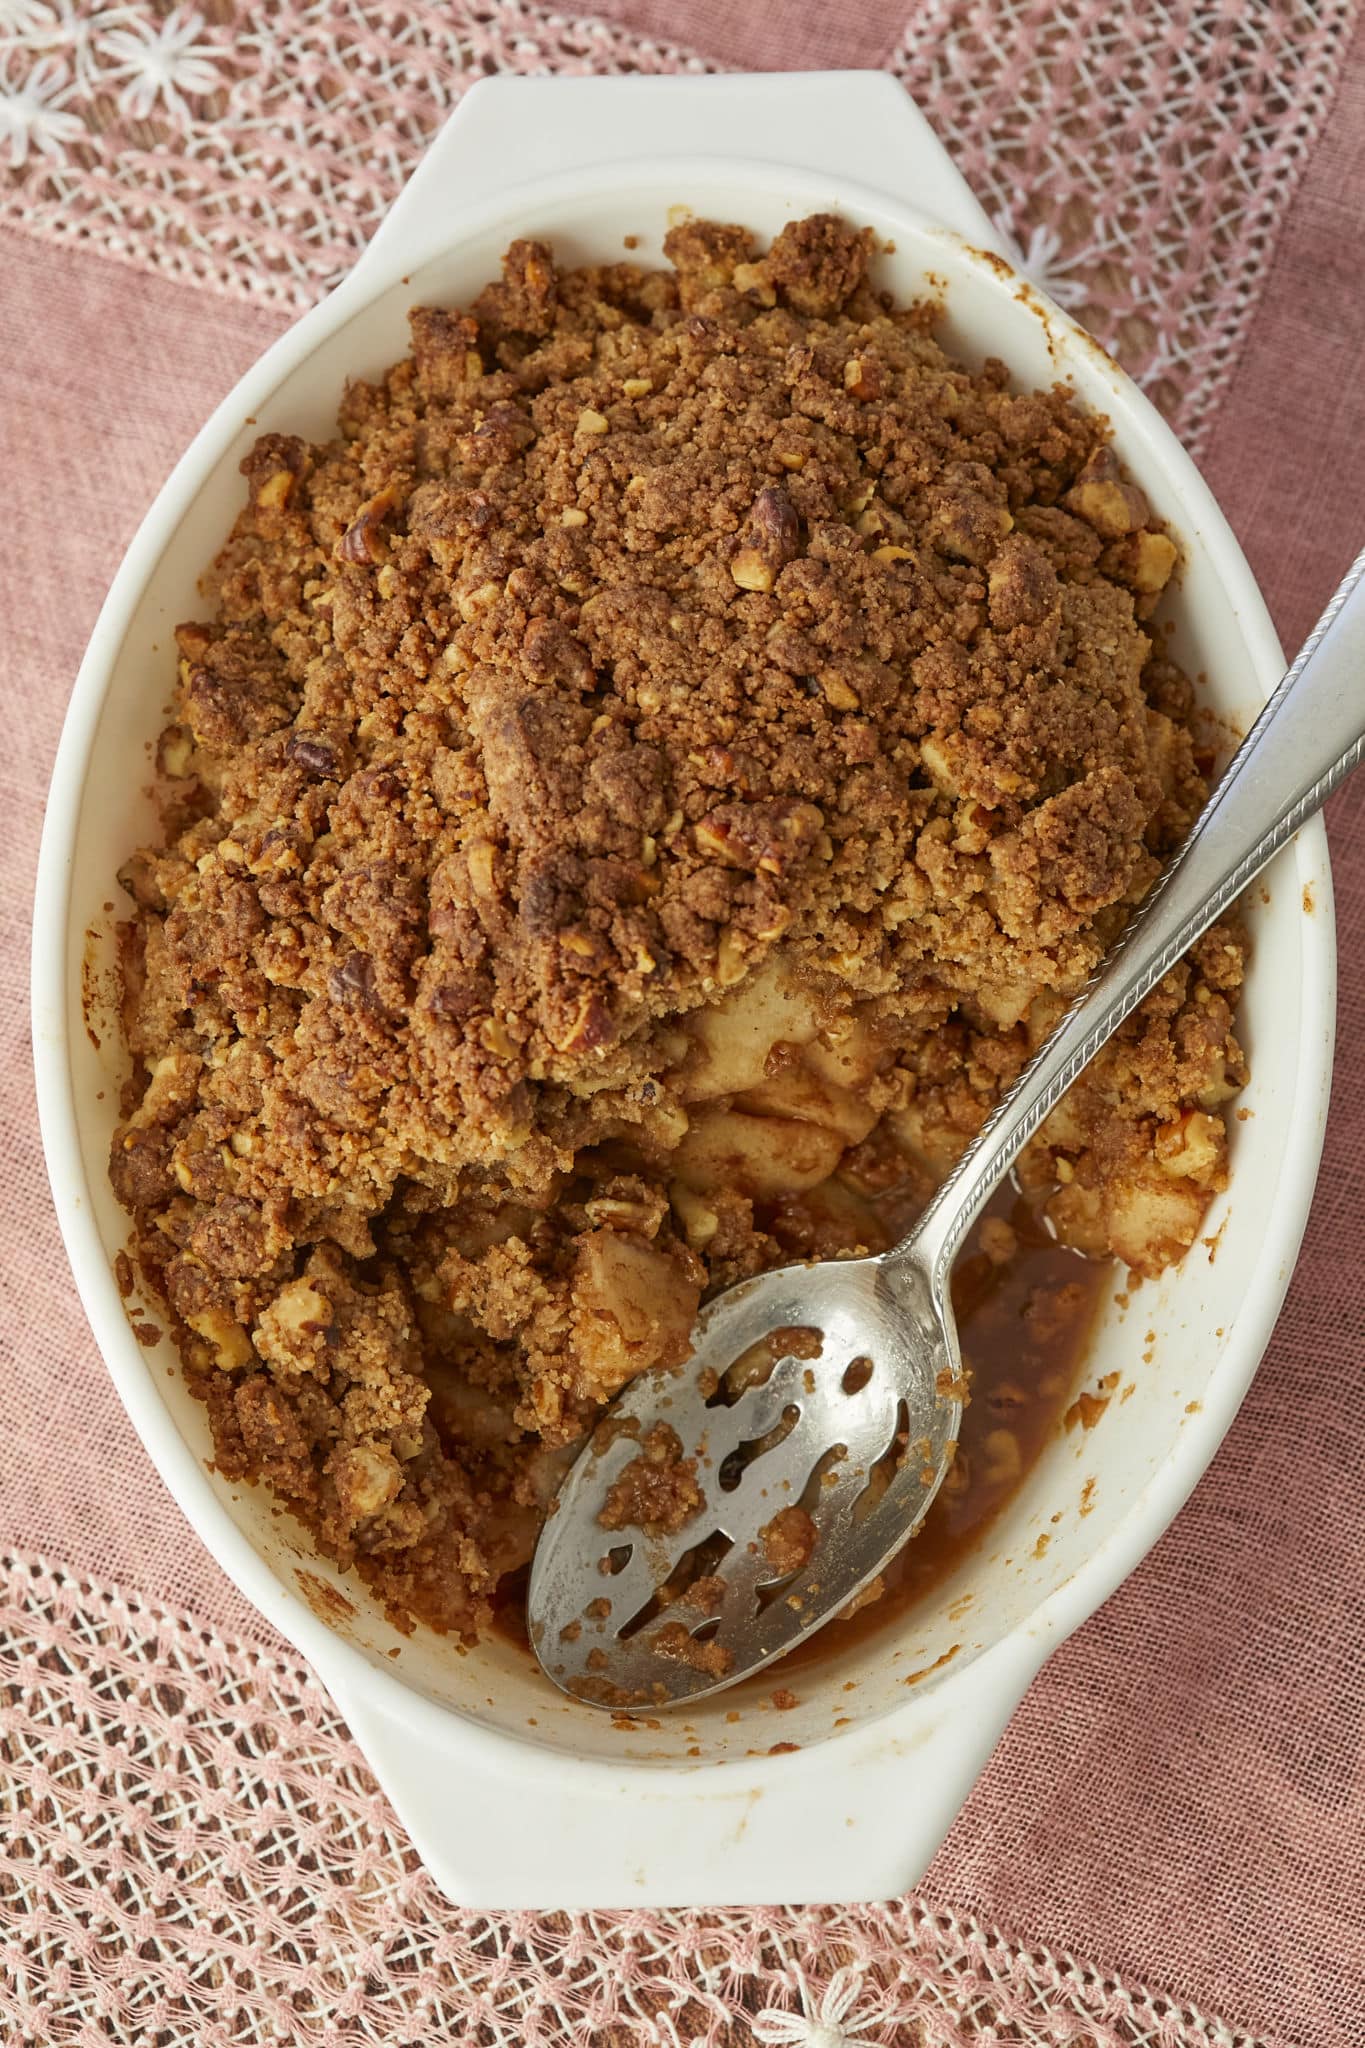 A metal spoon rests in a nearly half-eaten pear crumble